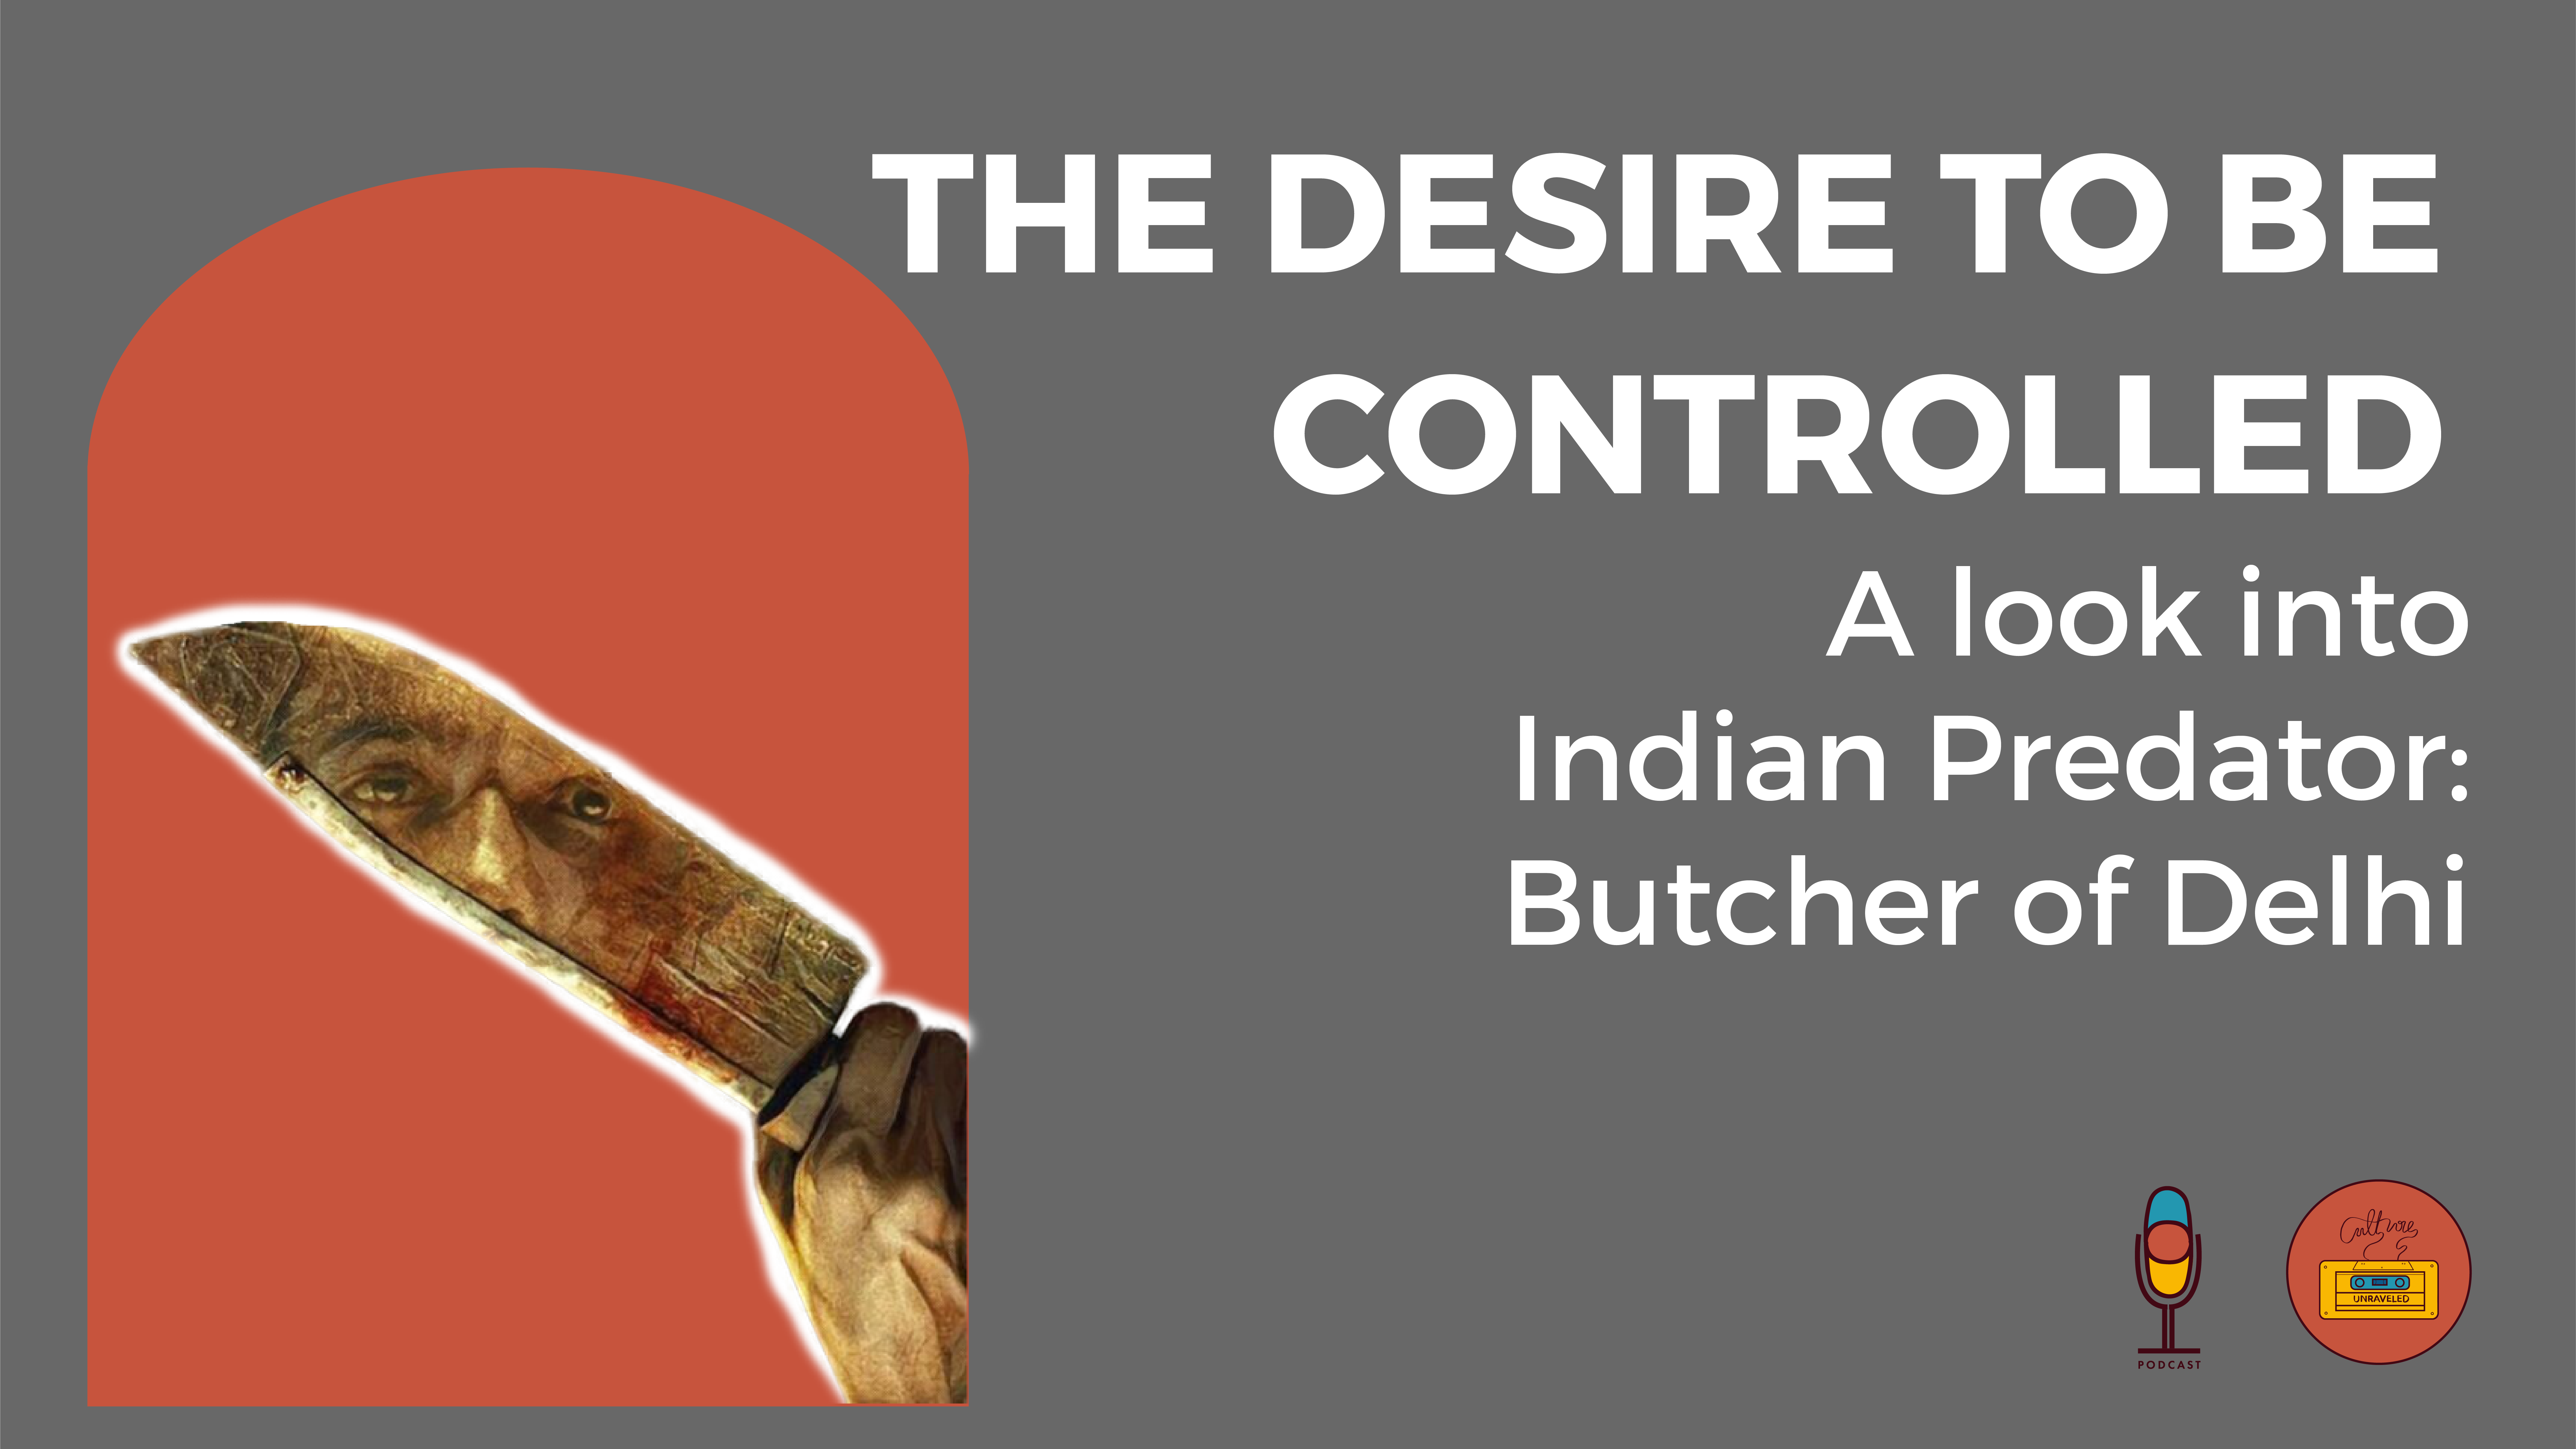 The Desire to be Controlled. A Look into Indian Predator: Butcher of Delhi